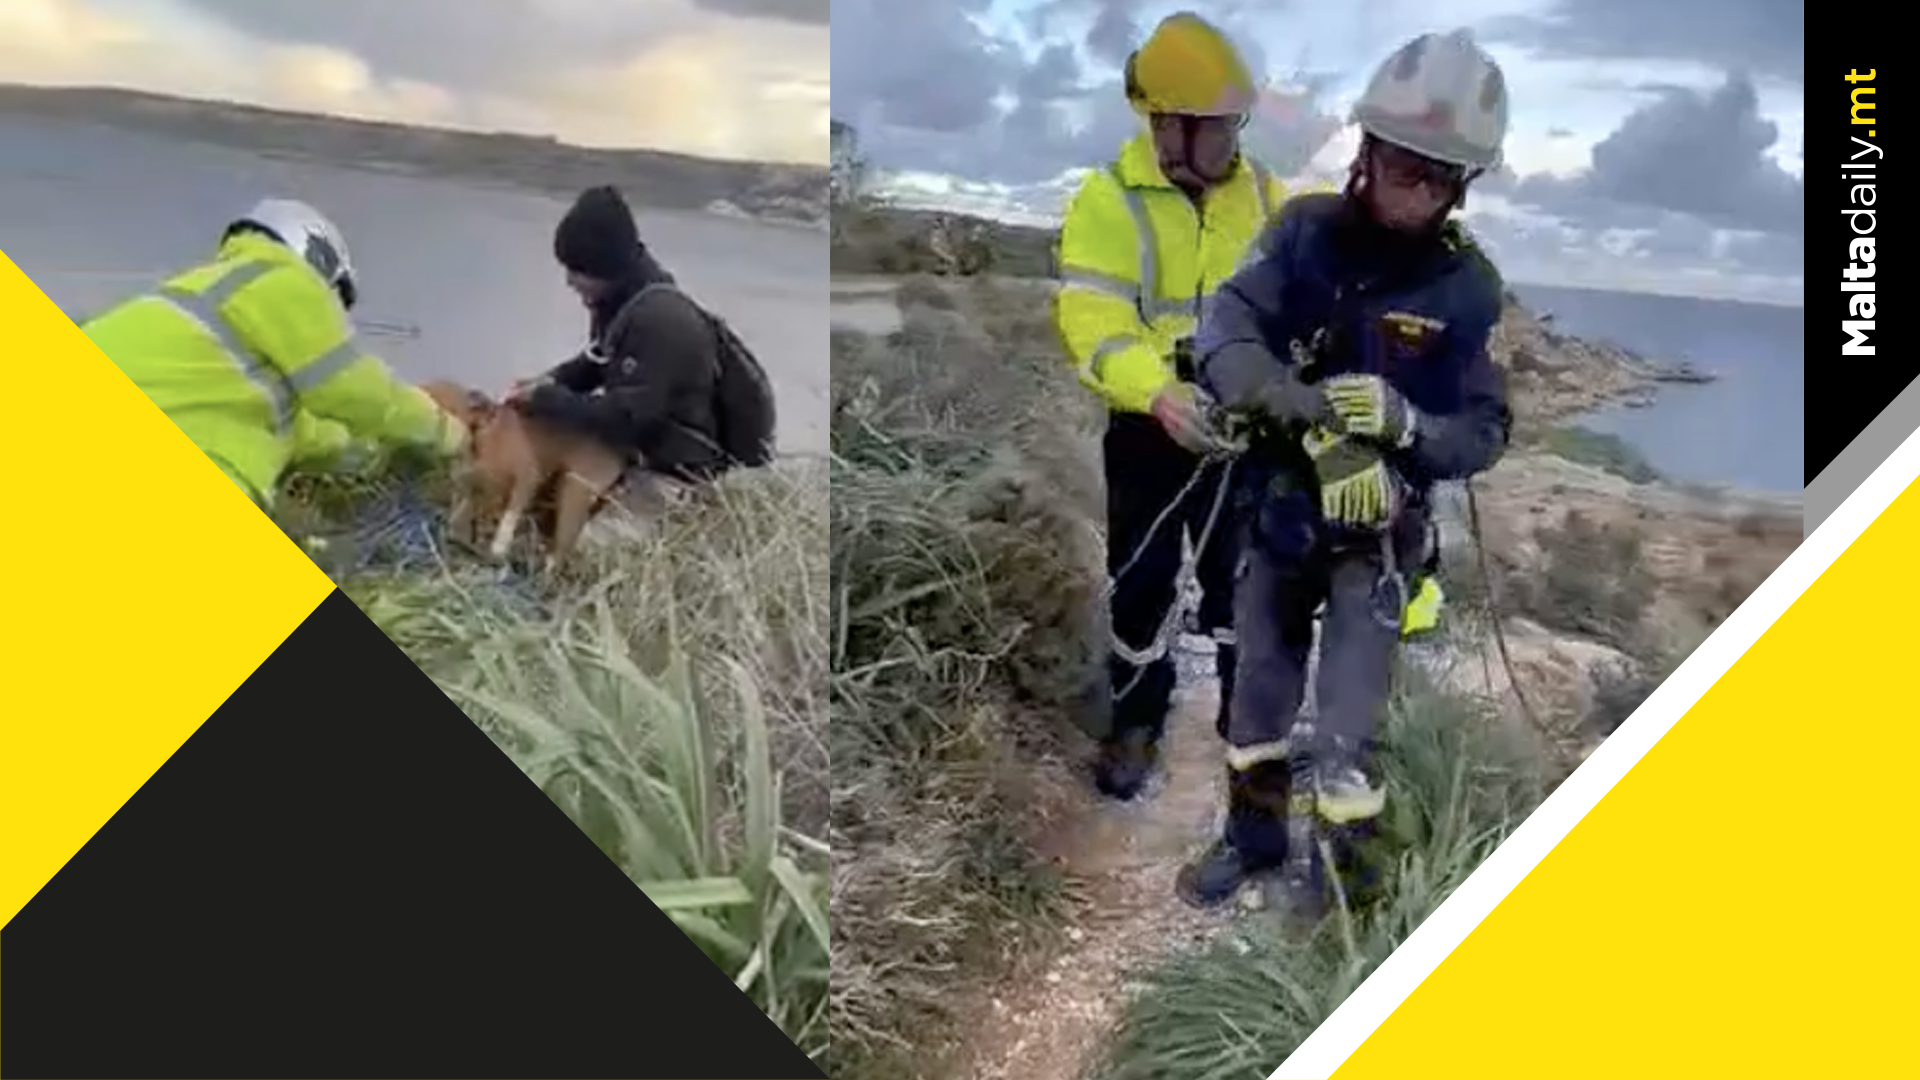 Dog saved after falling into a crevice in Aħrax